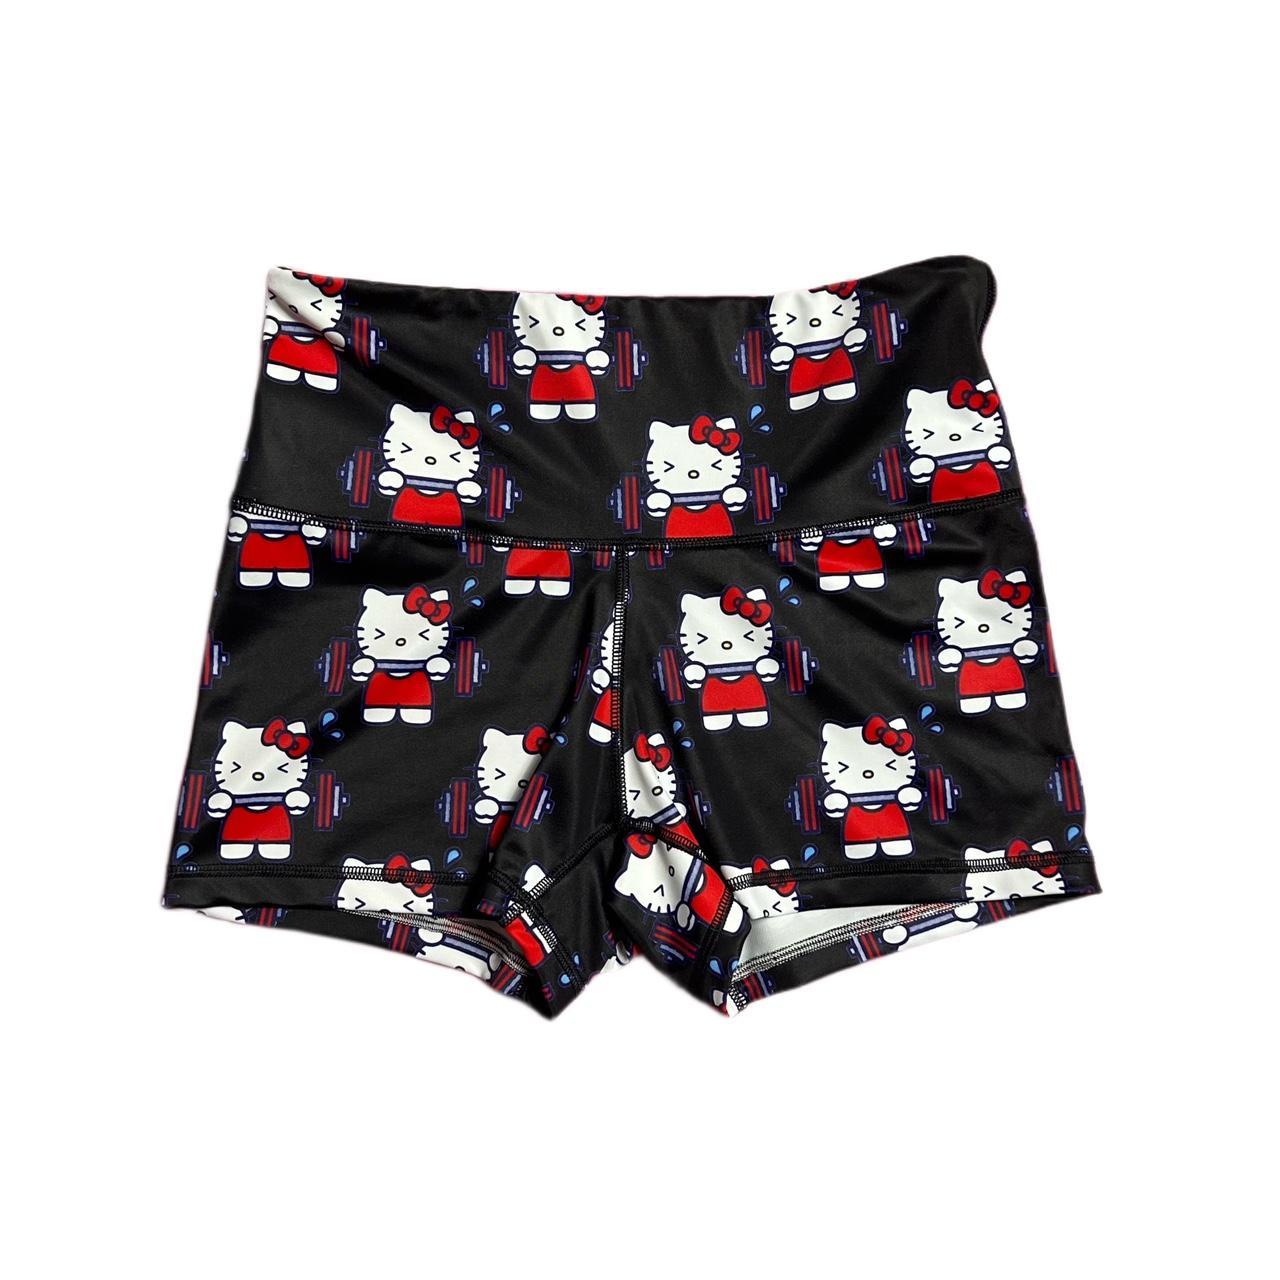 Sanrio Women's Black and Red Shorts | Depop